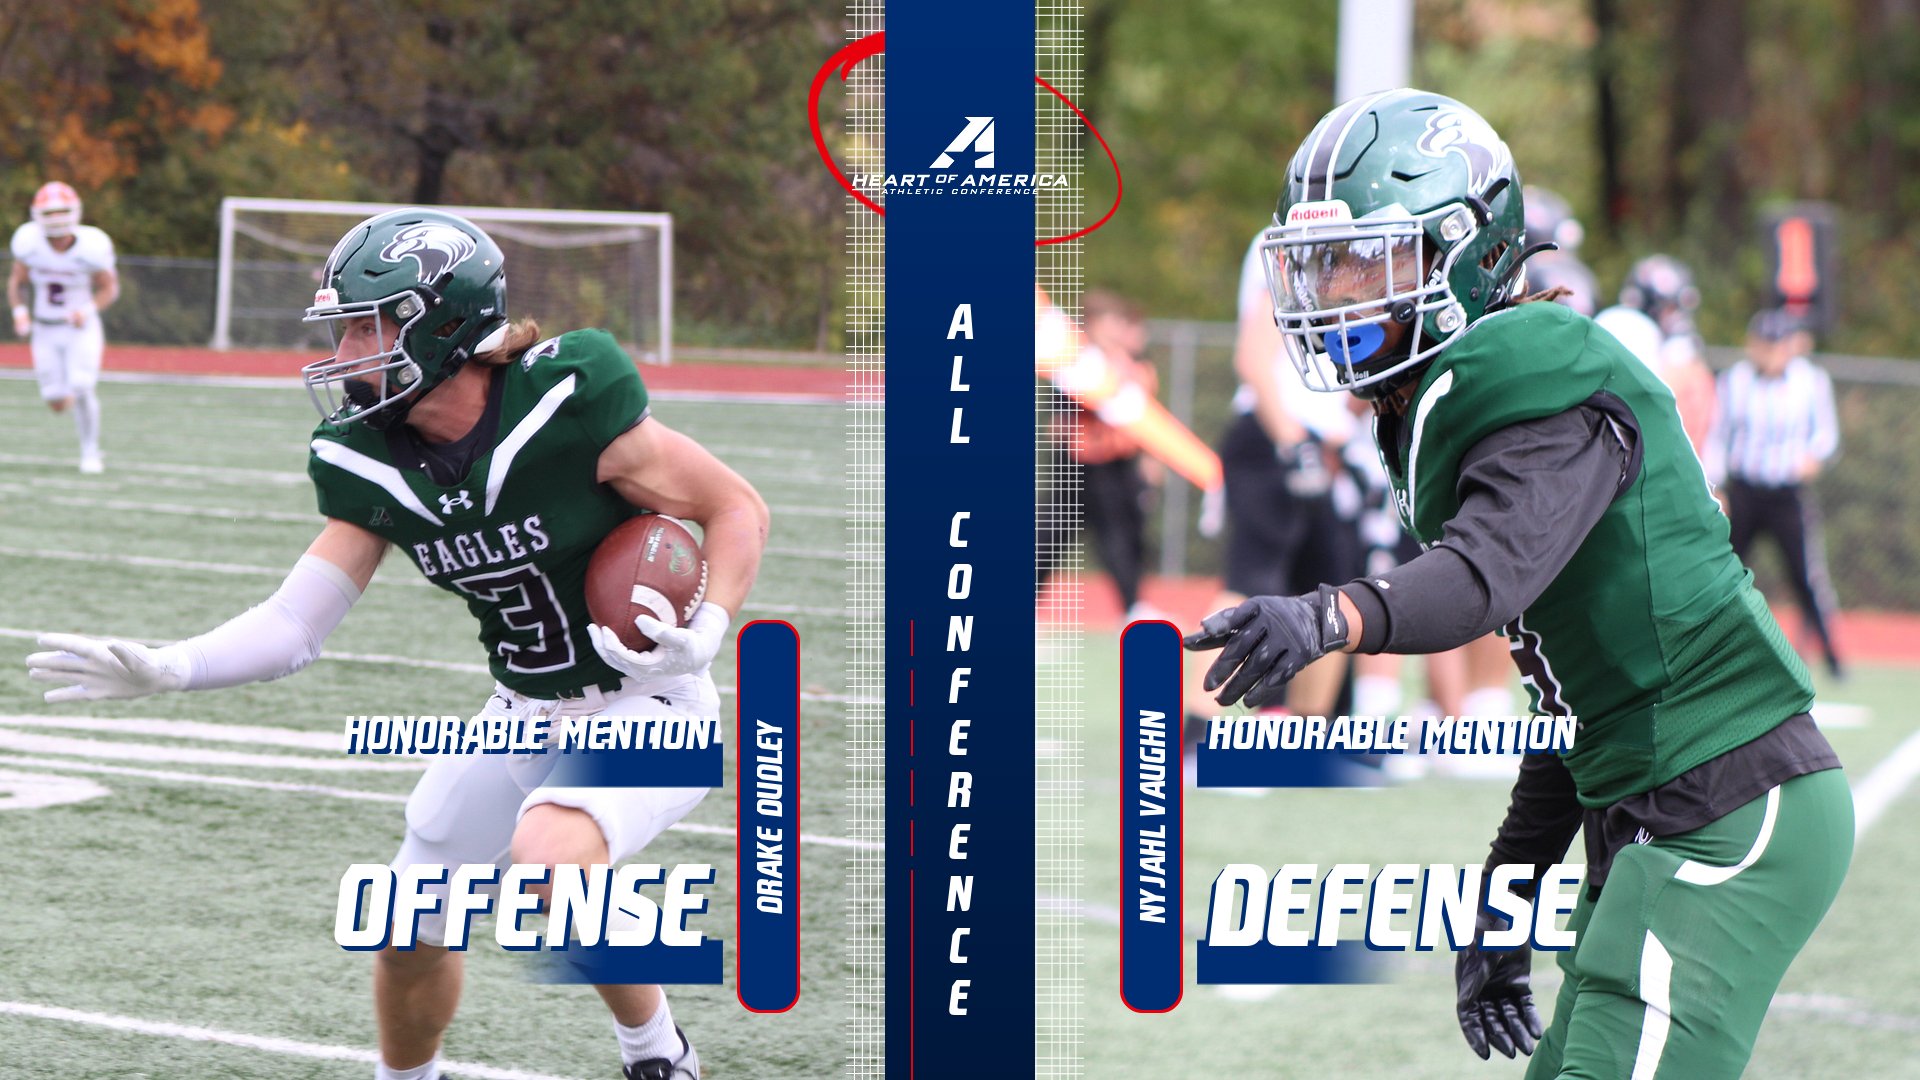 Dudley and Vaughn Earn Heart South Honorable Mention All-Conference Honors